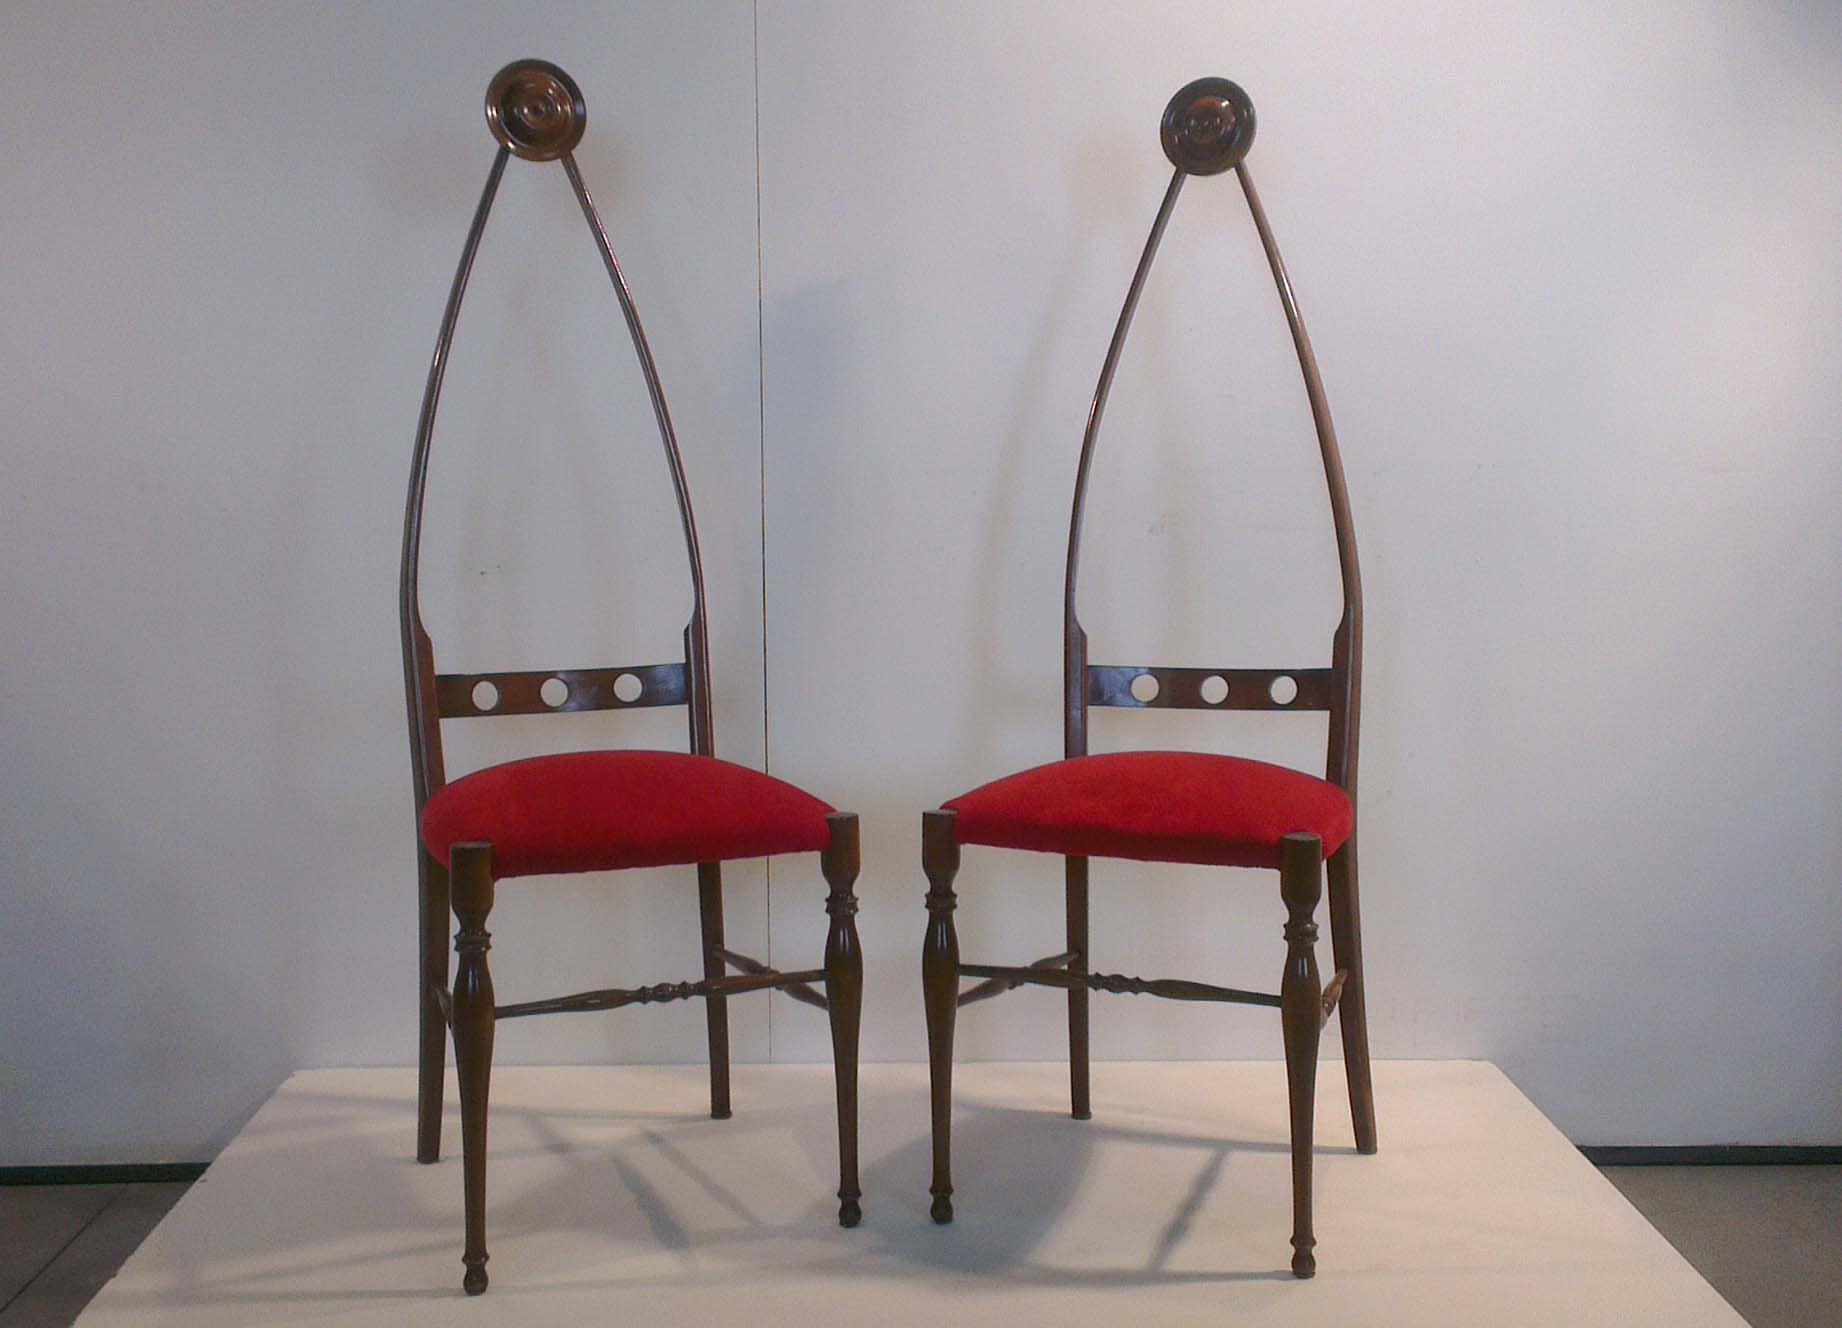 Curious High Backed Chairs